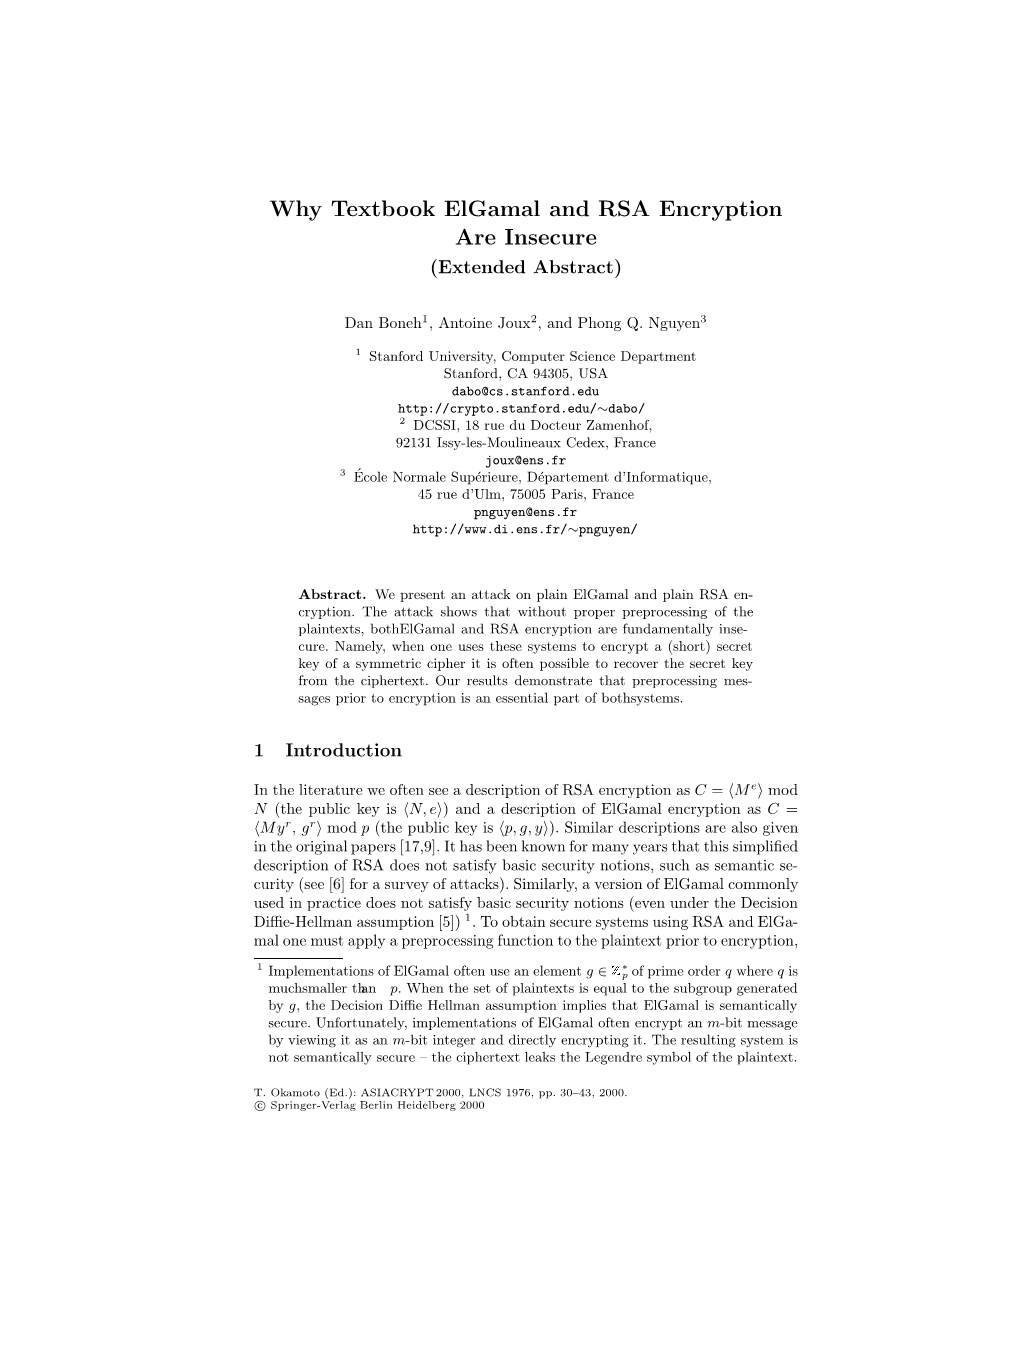 Why Textbook Elgamal and RSA Encryption Are Insecure (Extended Abstract)